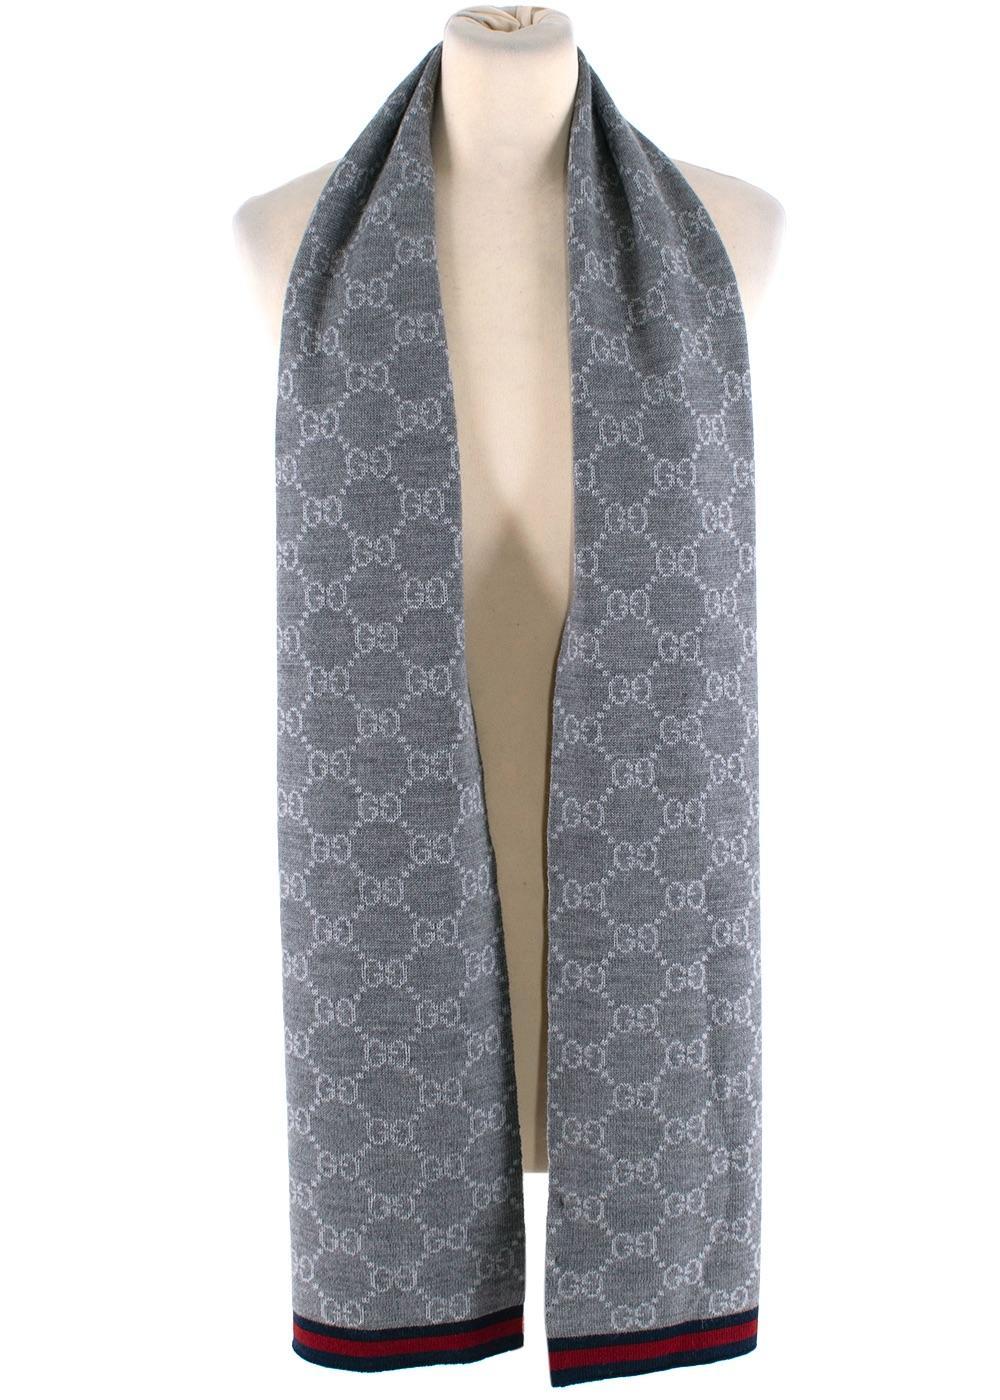 Gucci Hat/Shawl Set Light Grey

- GG Jacquard wool scarf and hat set
- All over GG signature print
- Navy & Red striped trim

Materials
100% Wool

Made In Italy

Dry Clean Only

PLEASE NOTE, THESE ITEMS ARE PRE-OWNED AND MAY SHOW SIGNS OF BEING